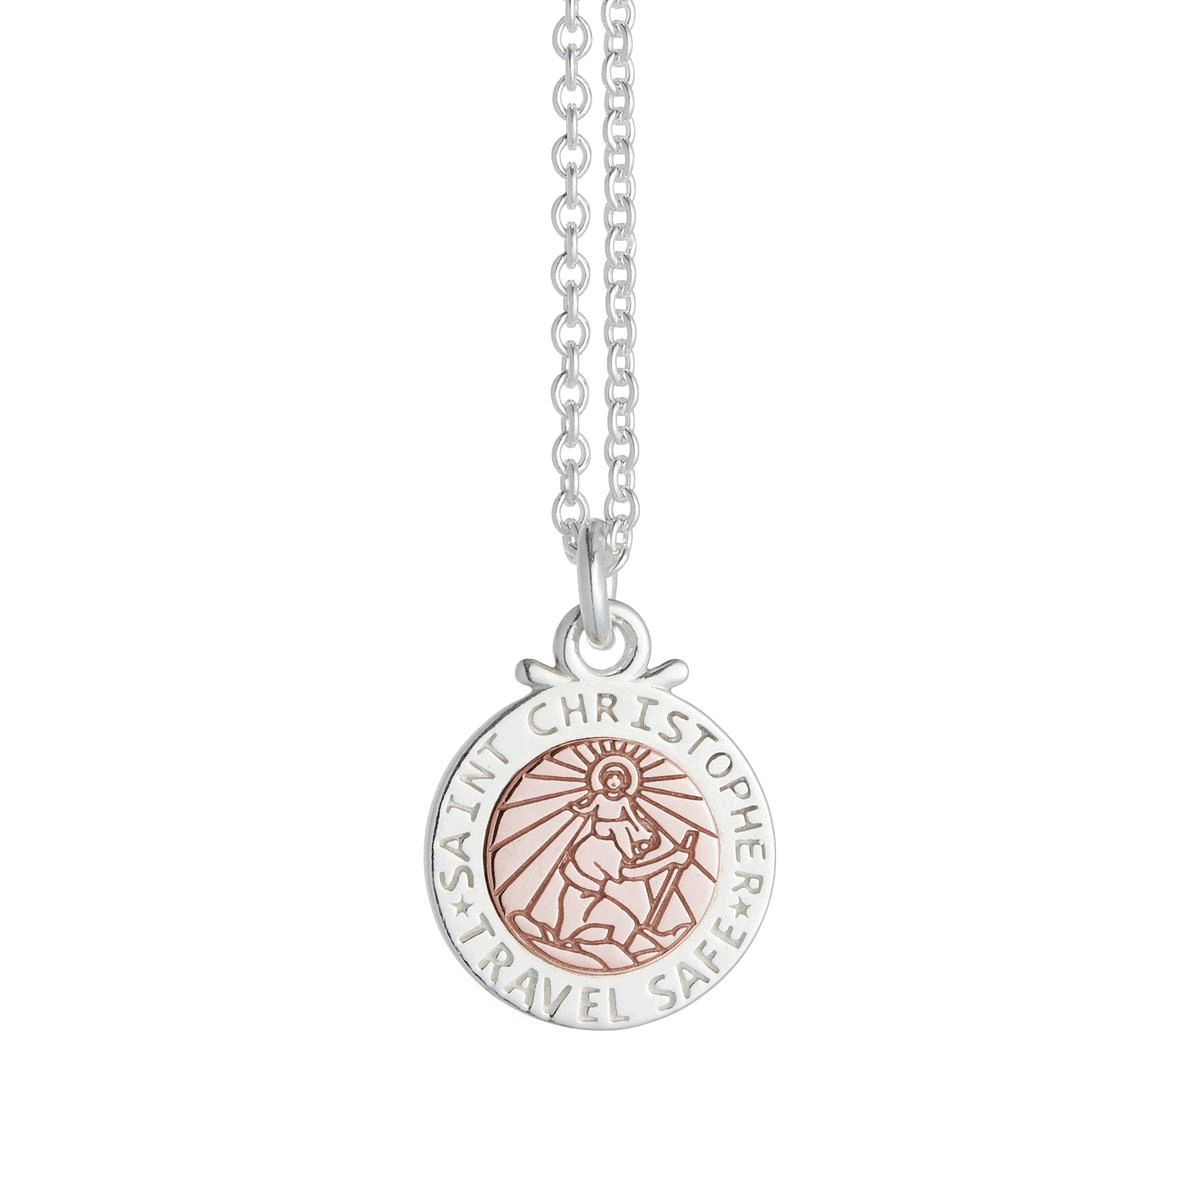 silver solid rose gold saint christopher necklace off the map scarlett jewellery